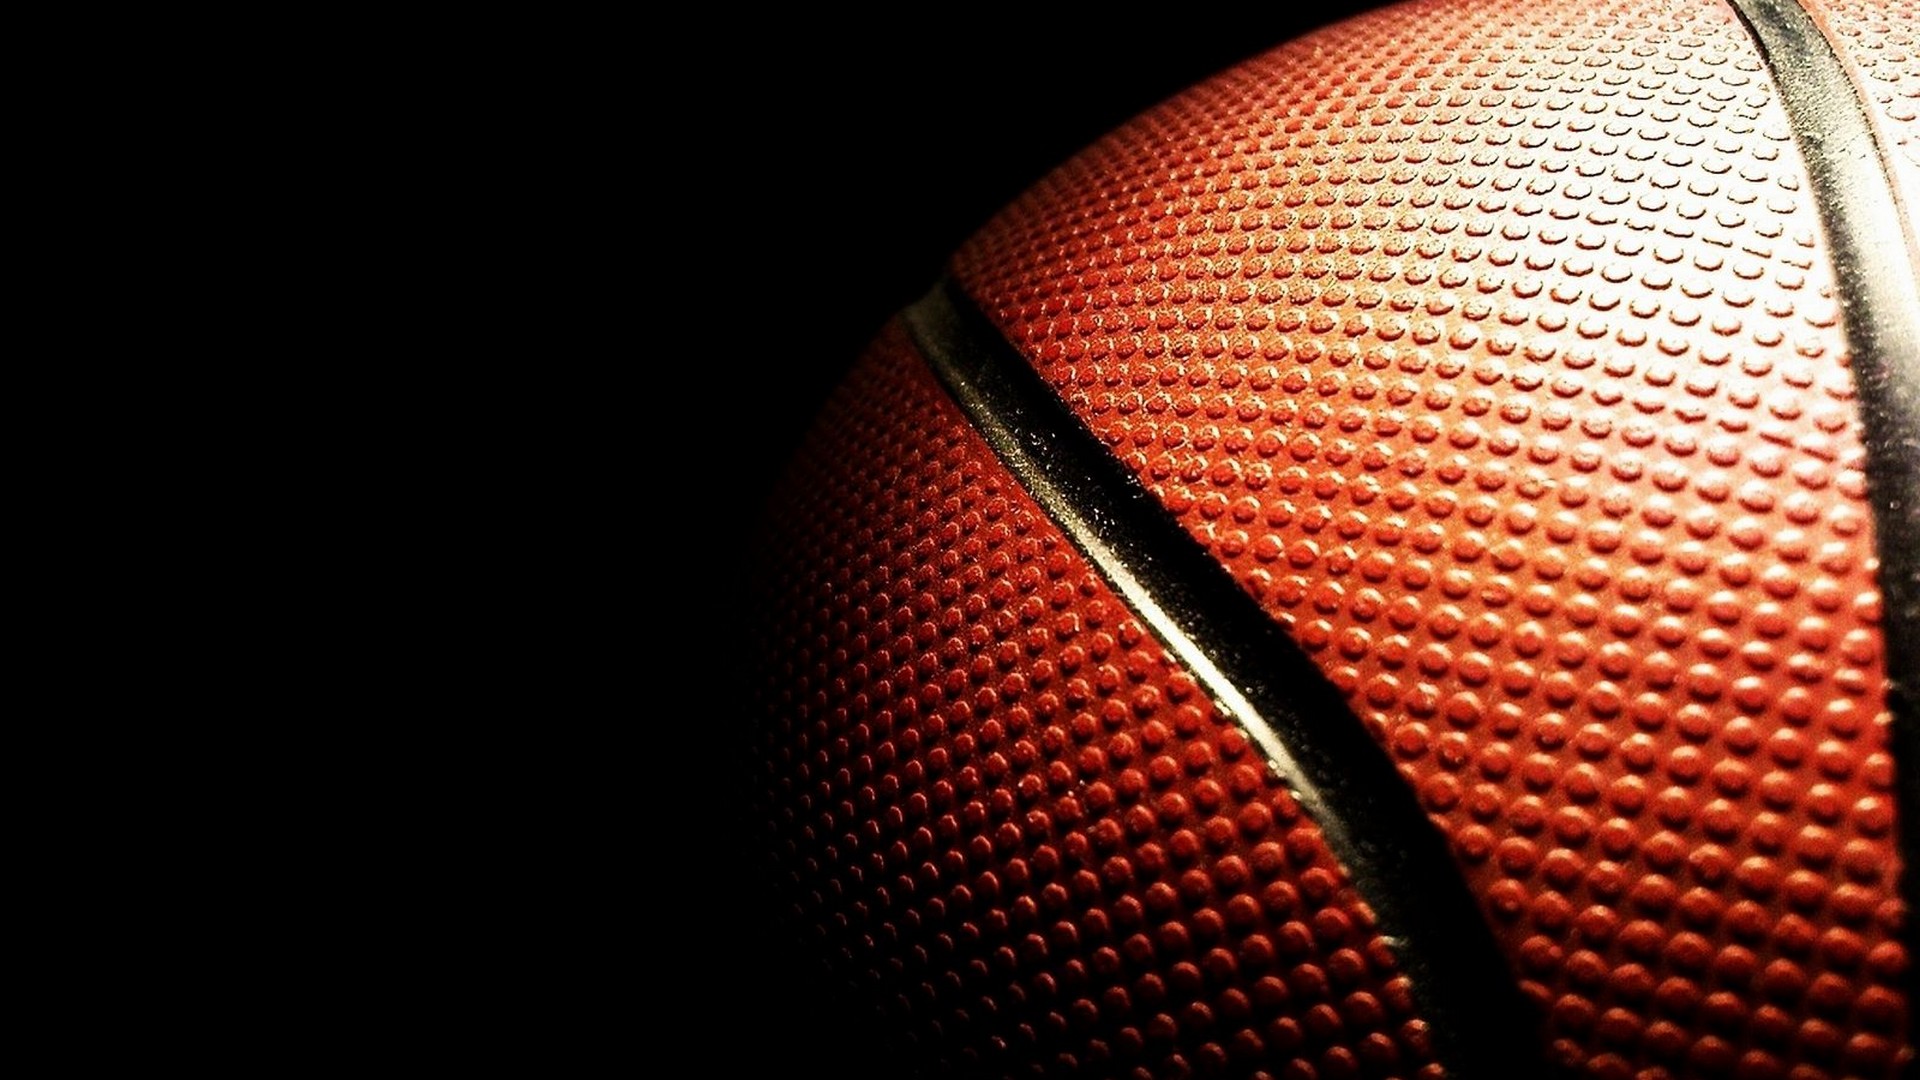 Wallpapers Basketball Games with image dimensions 1920x1080 pixel. You can make this wallpaper for your Desktop Computer Backgrounds, Windows or Mac Screensavers, iPhone Lock screen, Tablet or Android and another Mobile Phone device